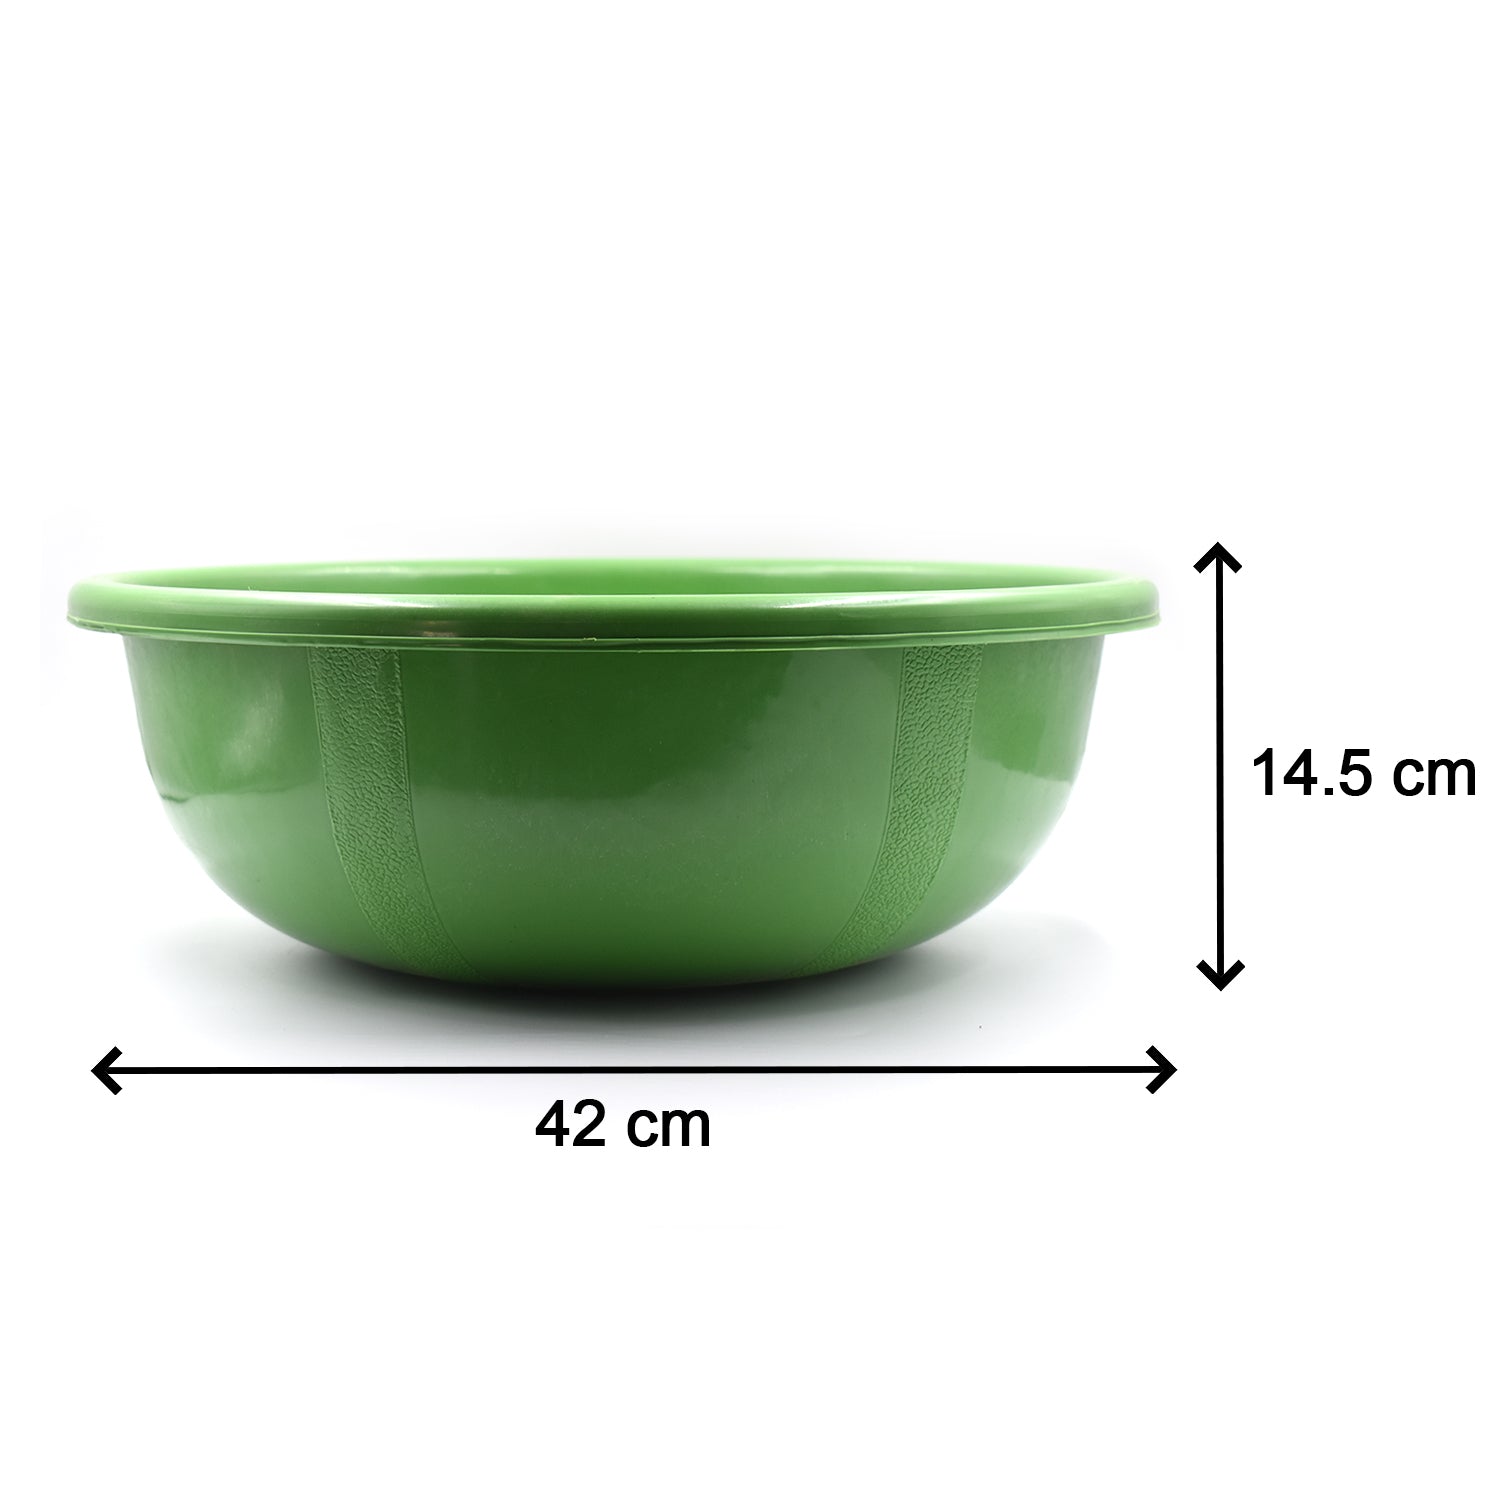 2681 Plastic Bath Tub for storing water and for using in all bathroom purposes etc.